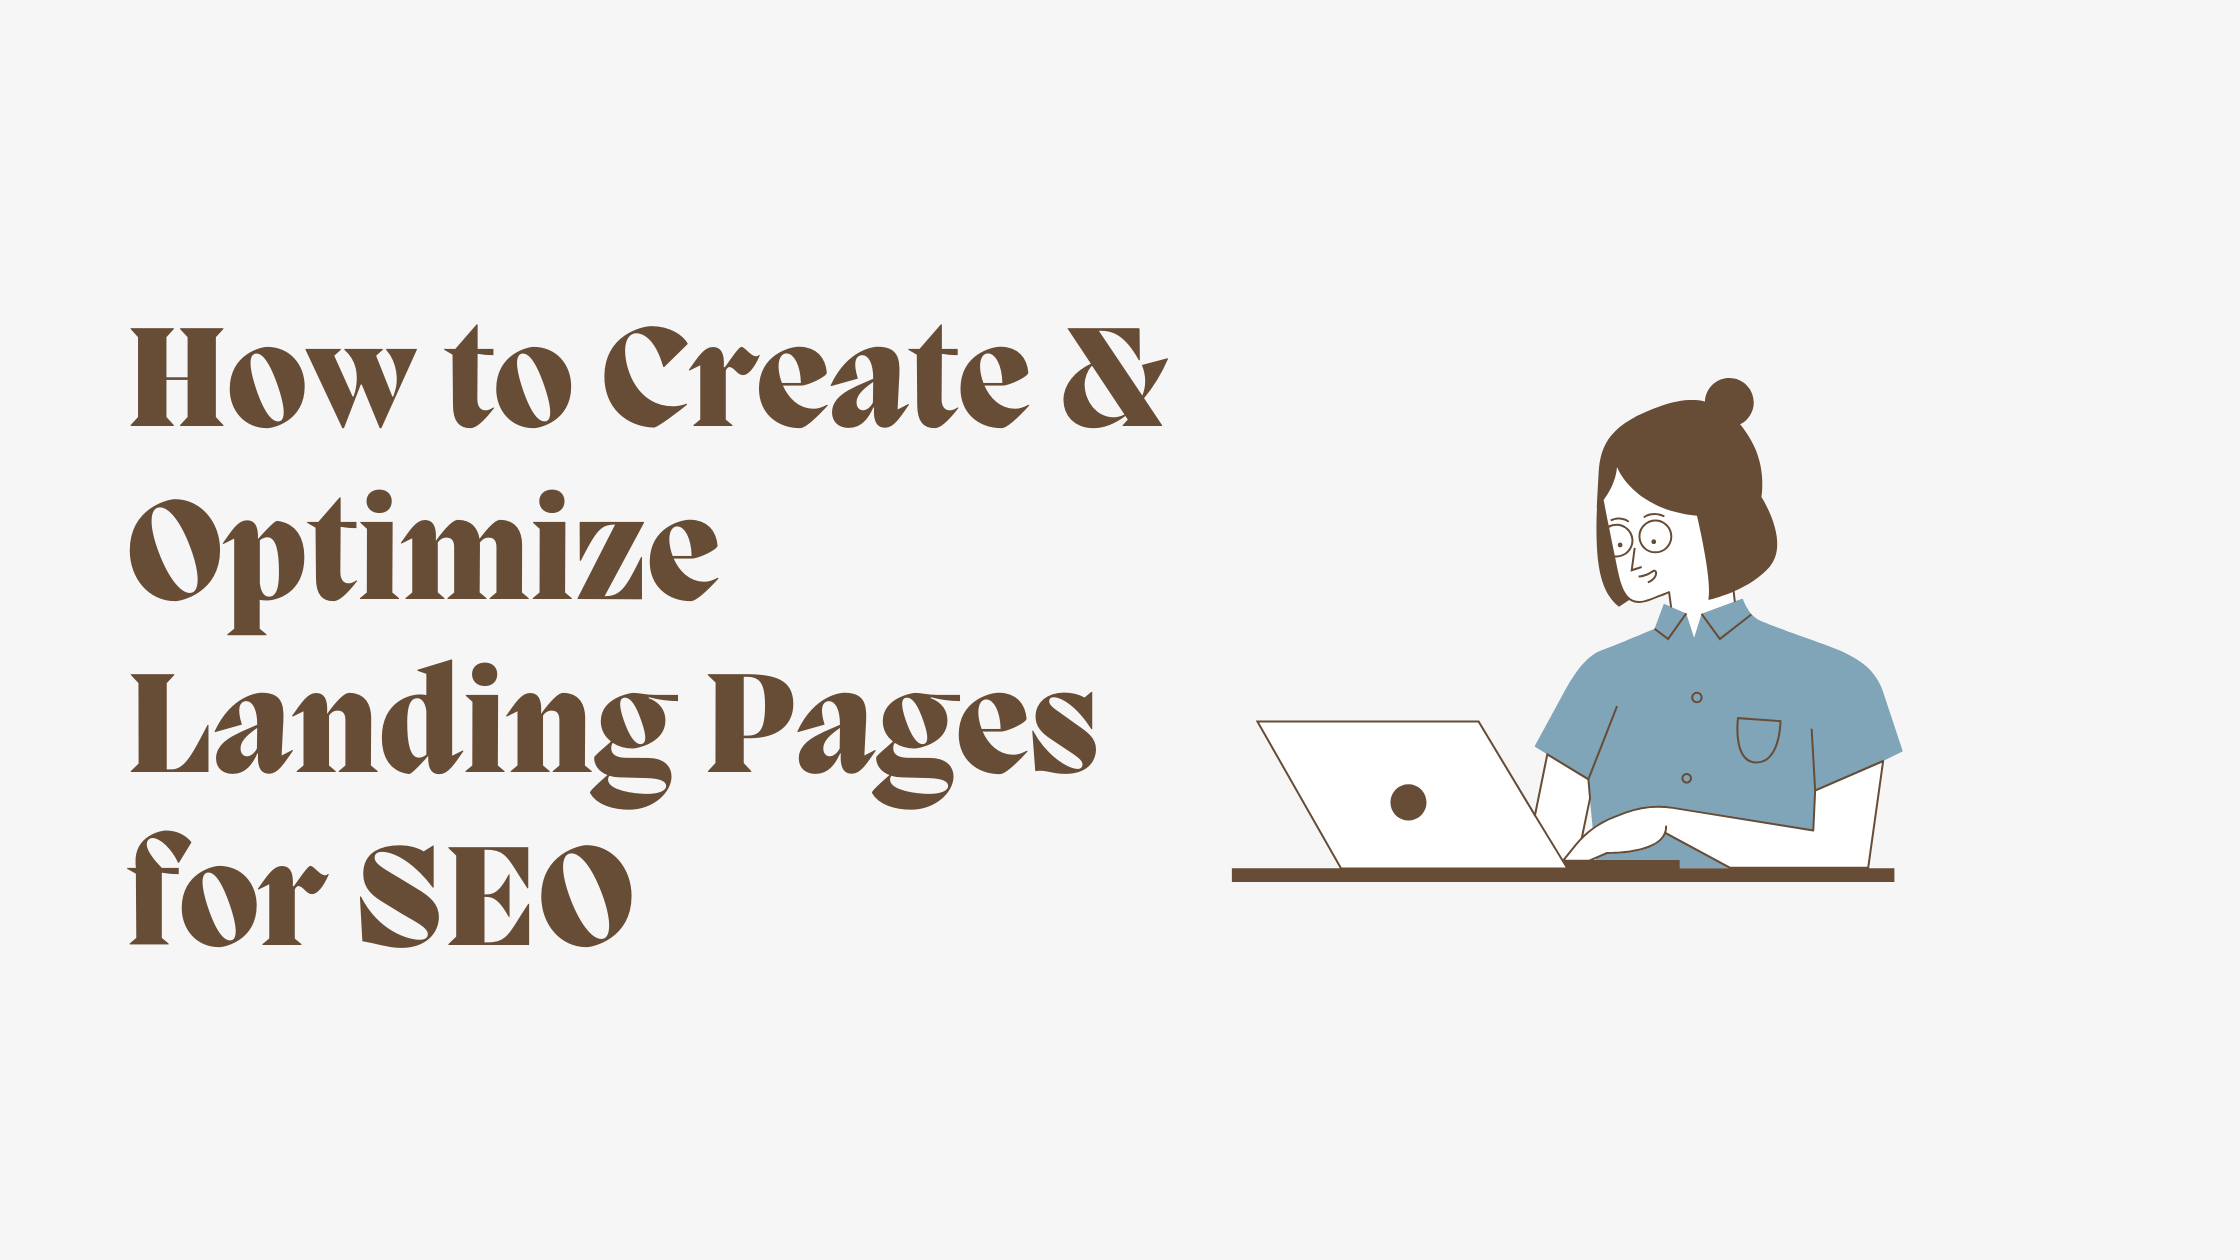 How to Create & Optimize Landing Pages for SEO